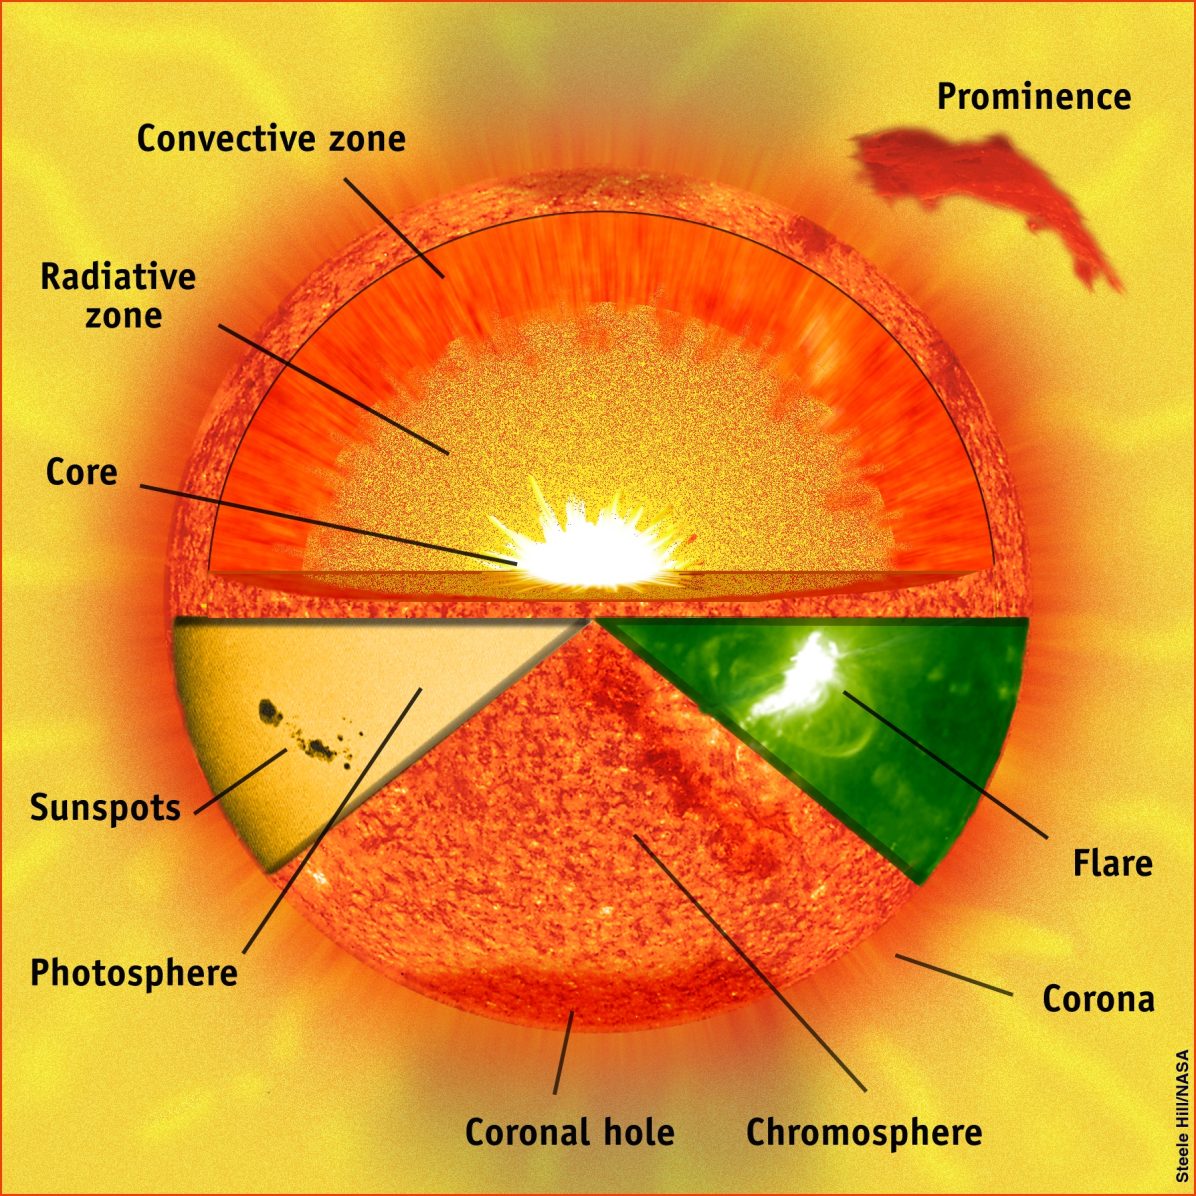 The Sun's atmosphere is hundreds of times hotter than its surface – here's  why